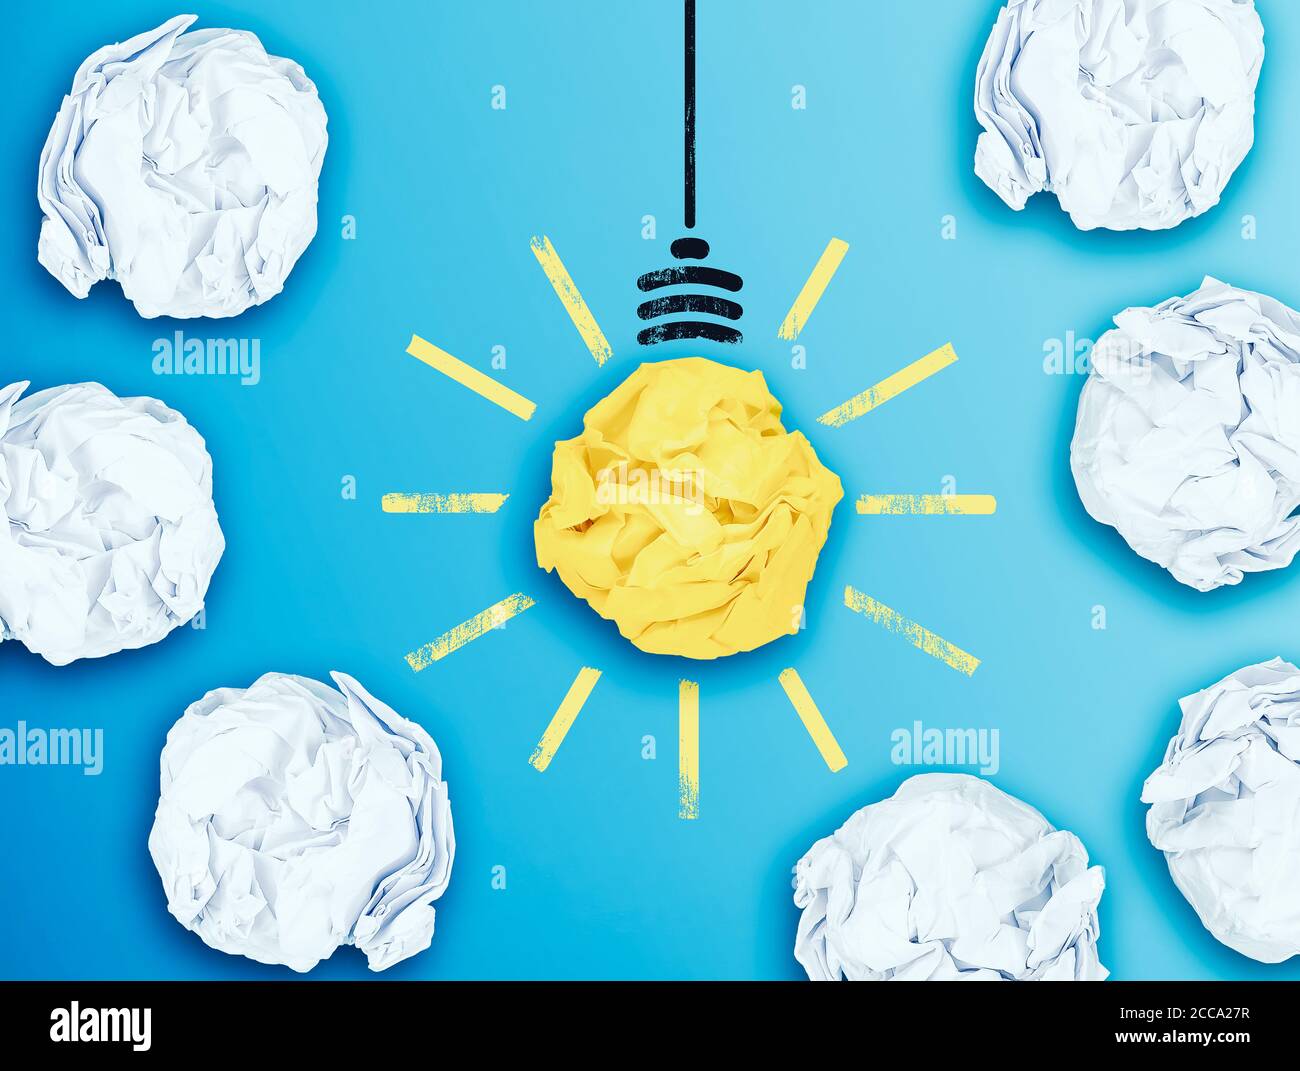 illuminated light bulb in midst of crumpled paper balls, having an idea concept Stock Photo